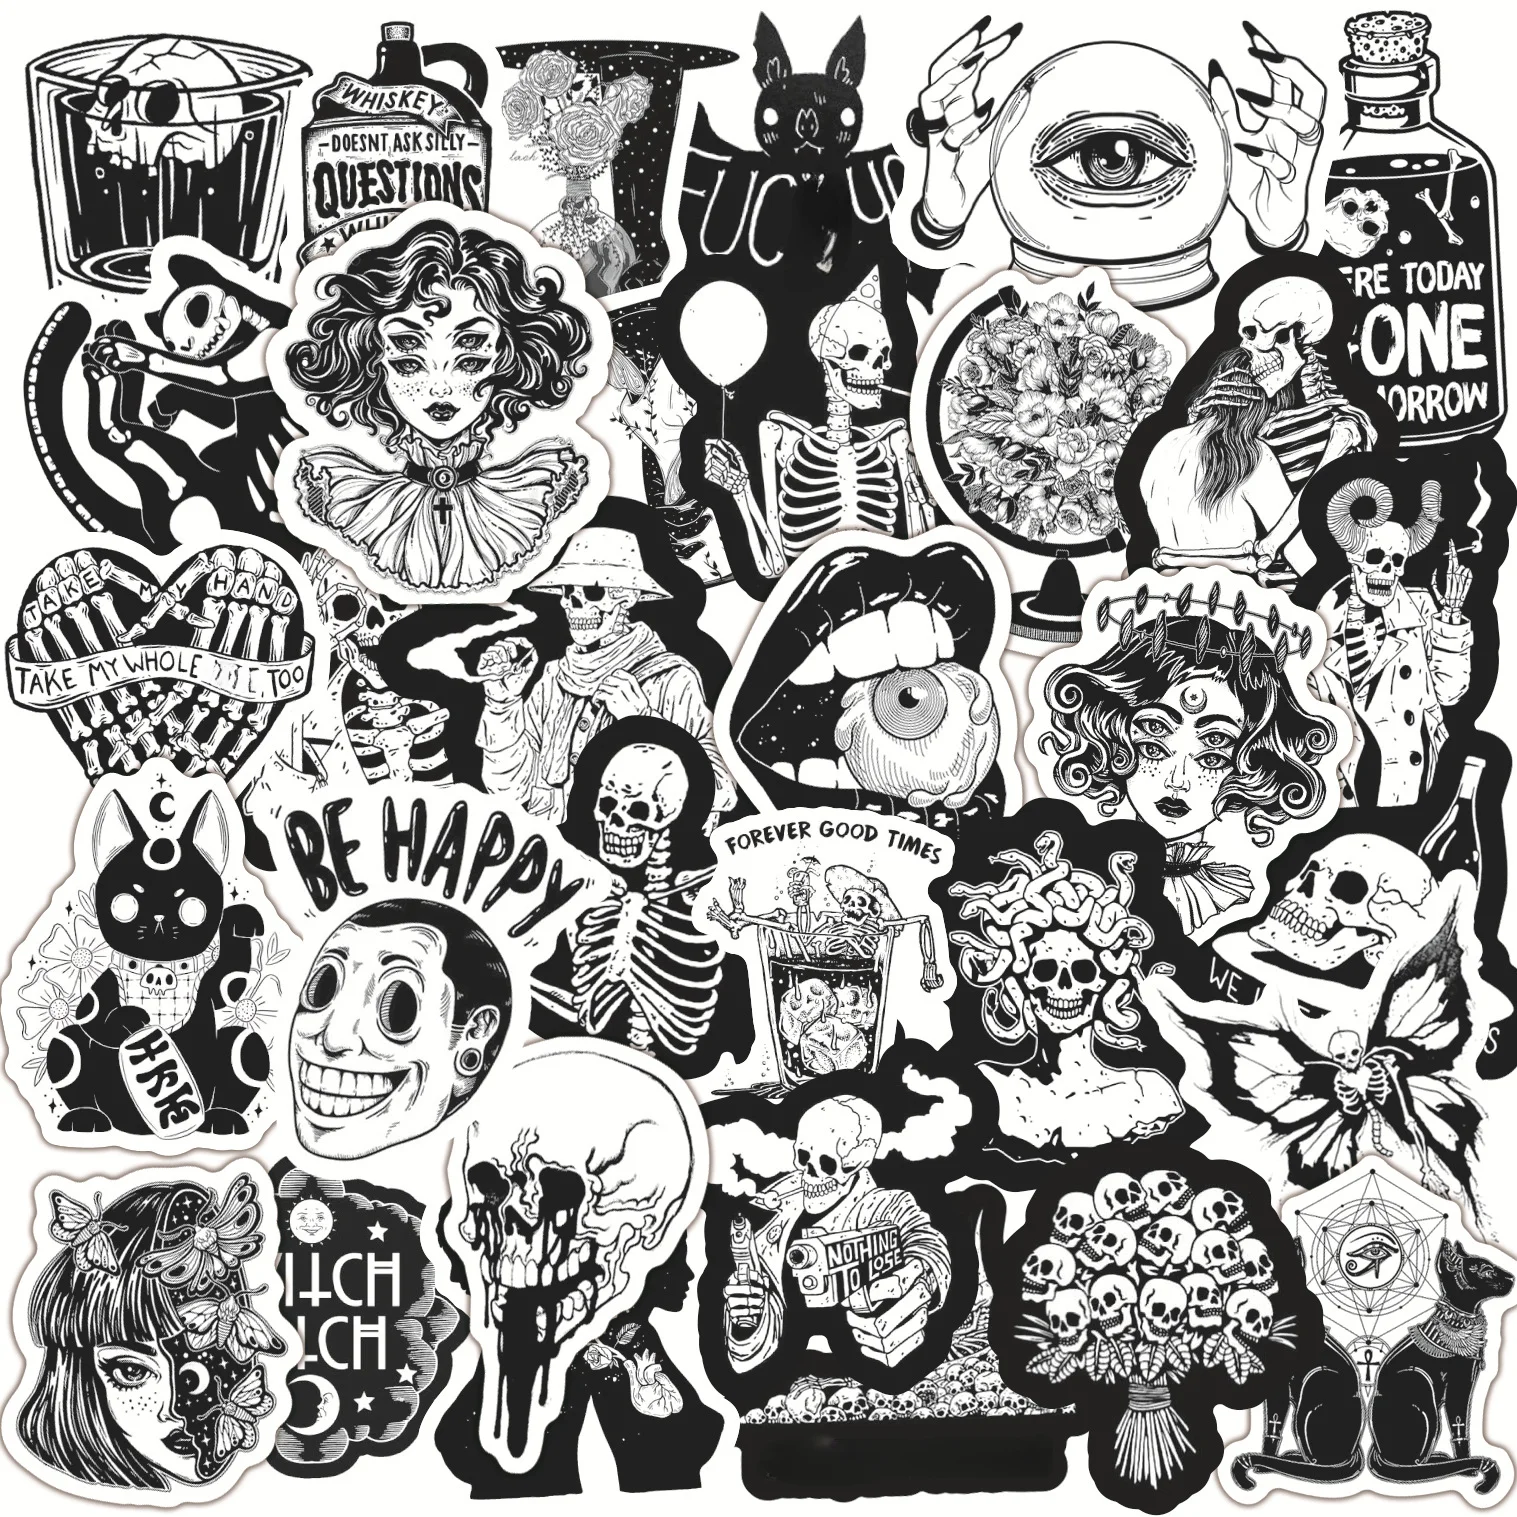 100PCS Mixed Black White Gothic Stickers Graffiti Motorcycle Skateboard Travel Phone Case Decal Toys Sticker Waterproof 30 sheets 56k notepad diary notebook drawing painting graffiti blank black paper notebook 60 pages sketchbook